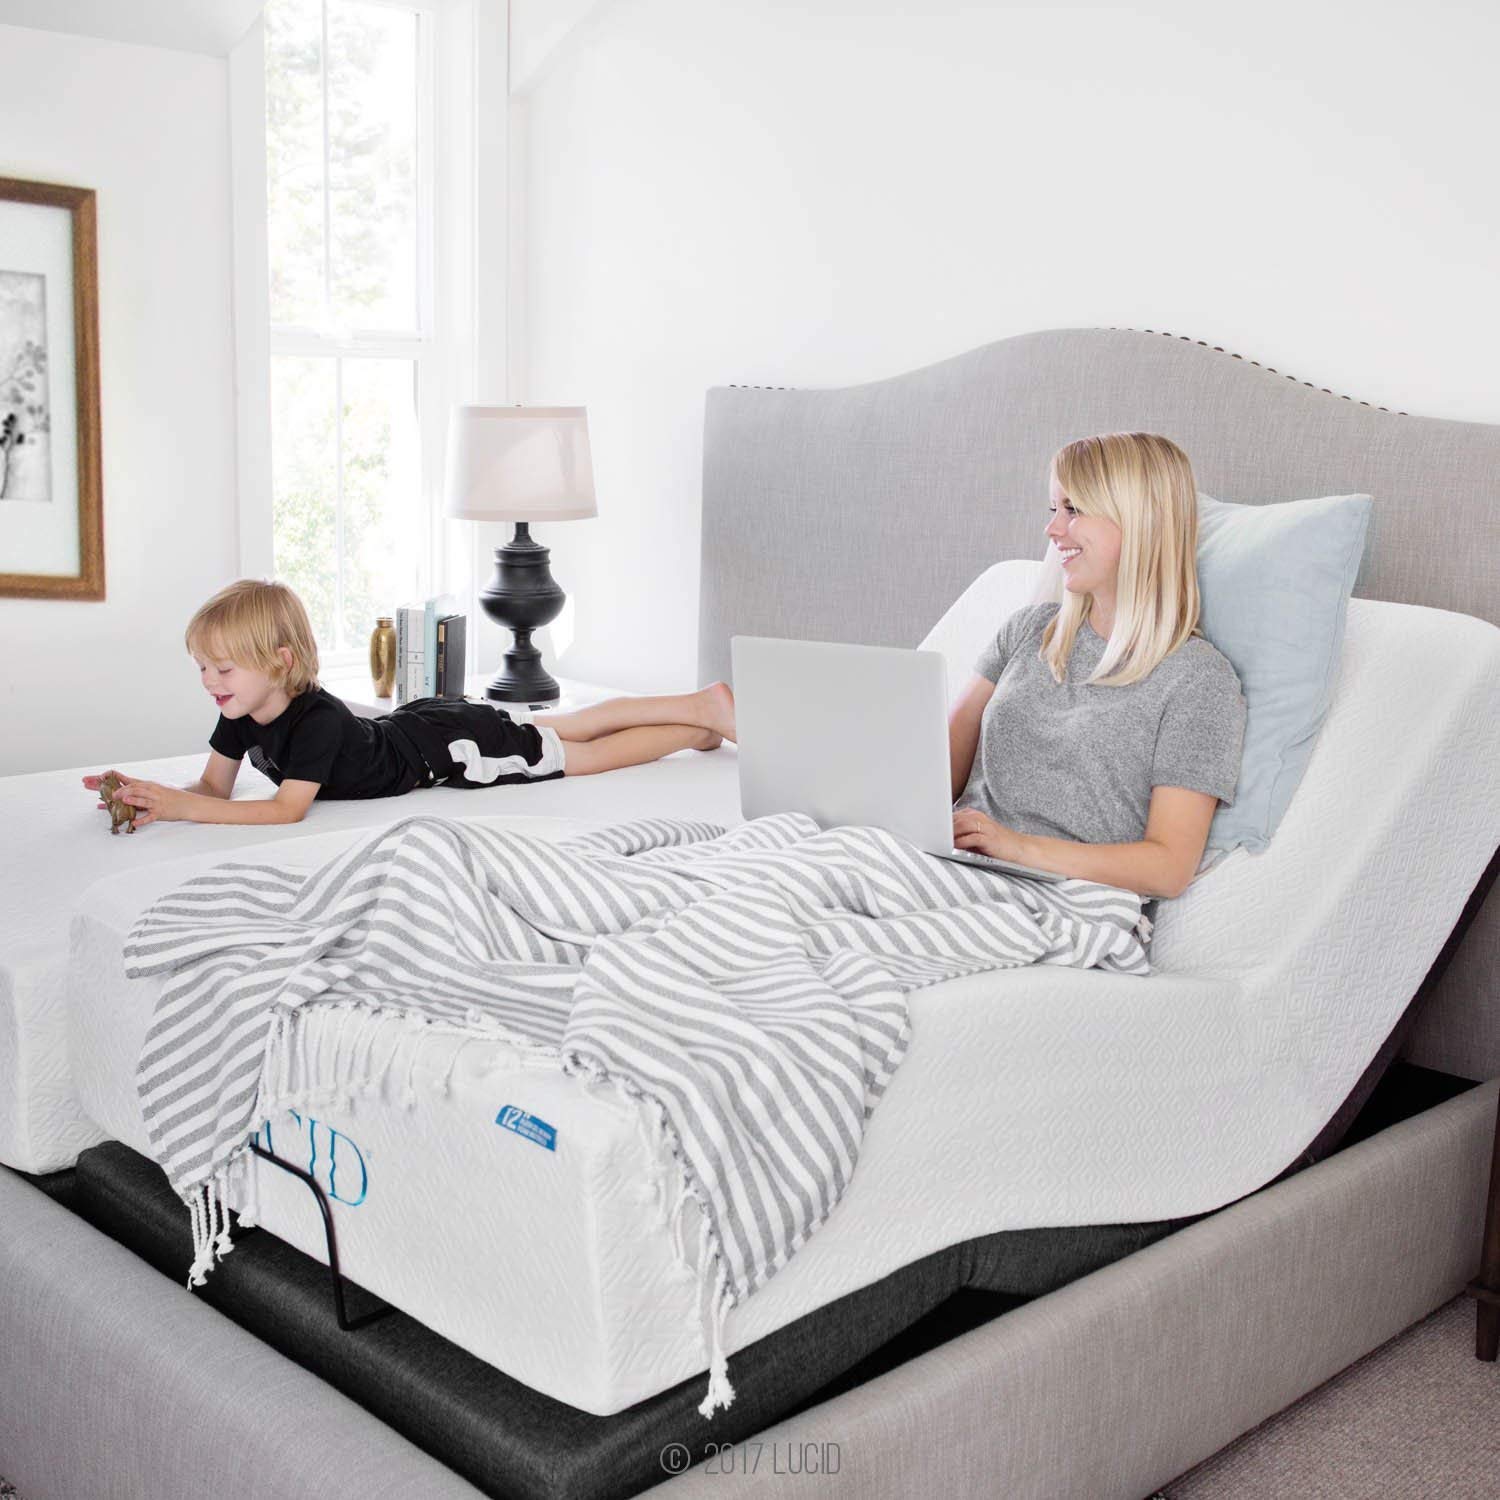 LUCID L300 Adjustable Bed Base-5 Minute Assembly-Dual USB Charging Stations Head and Foot Incline-Wireless Remote Control-Upholstered-Ergonomic, Twin XL, Charcoal